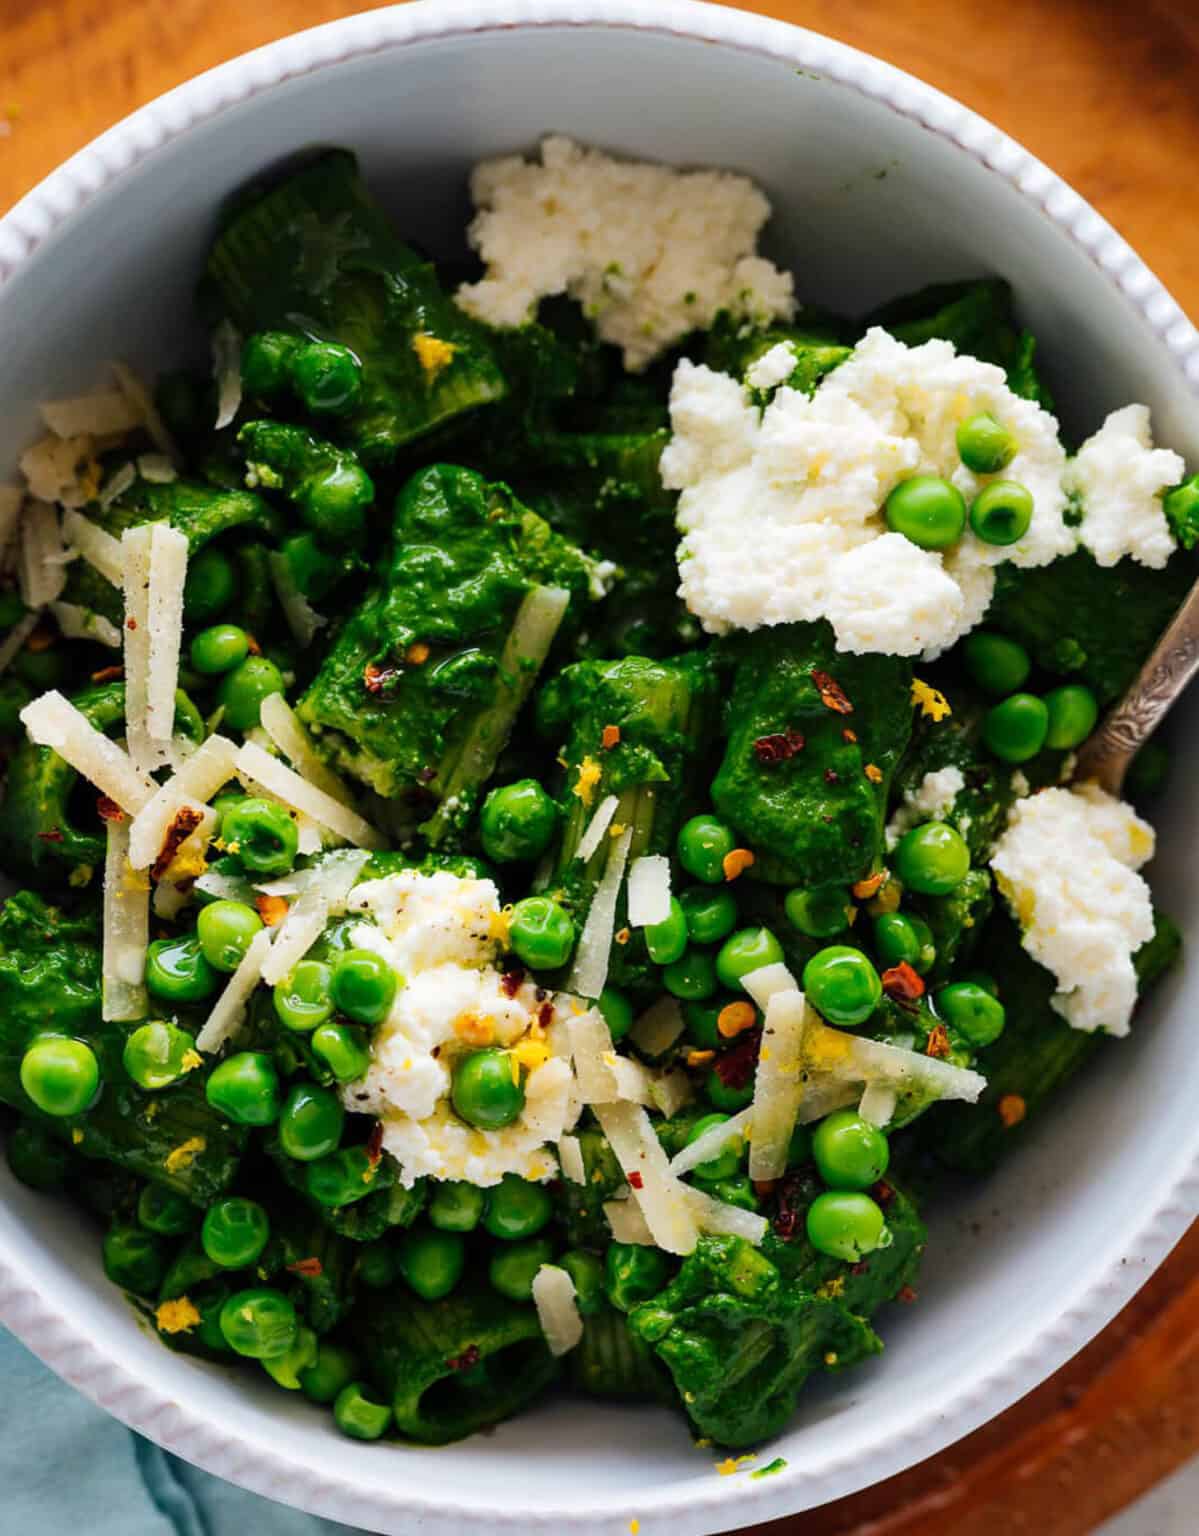 Pea Recipes: 17 easy delicious ideas - The clever meal